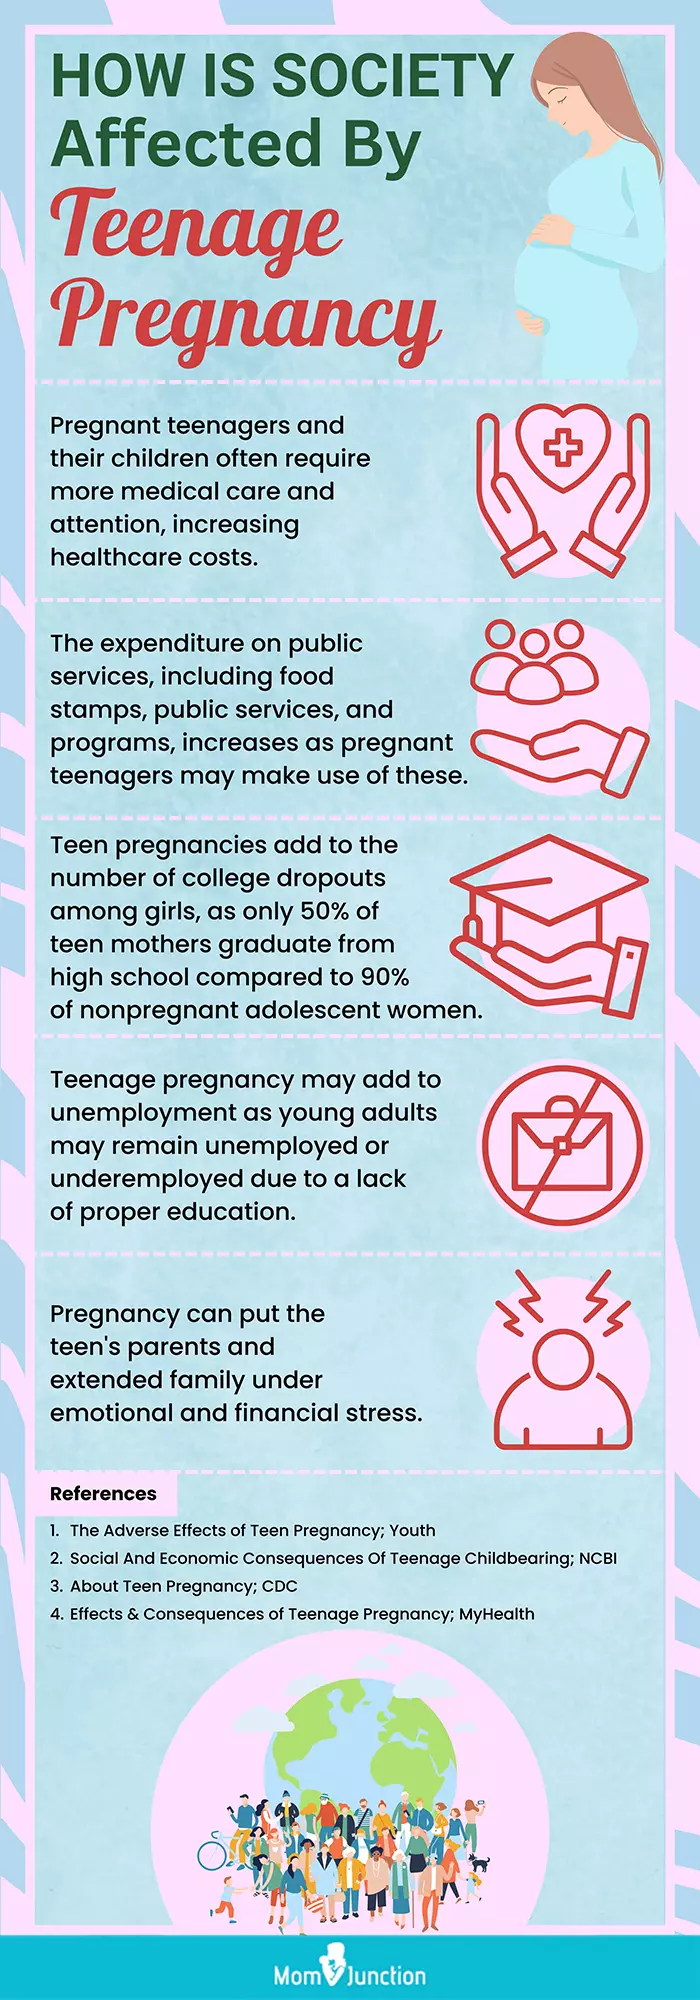 how is society affected by teenage pregnancy (infographic)